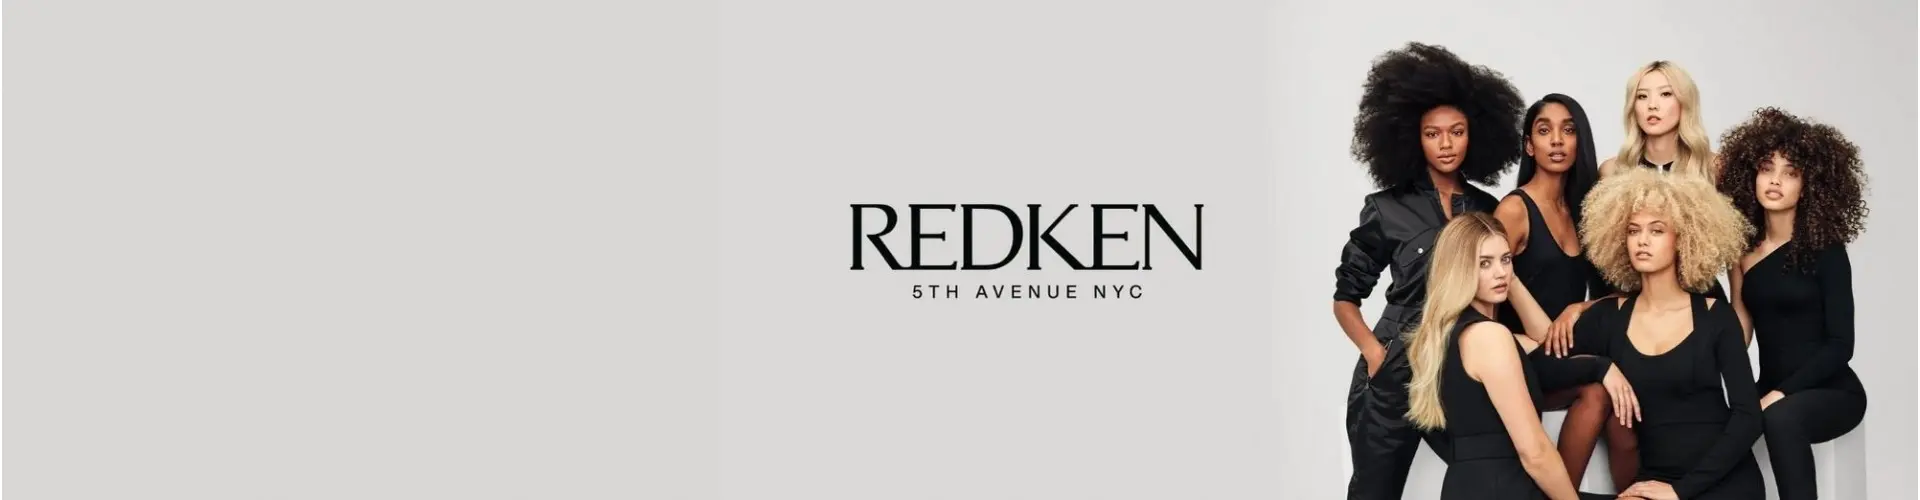 Redken at -20% with the Promo code: "REDKEN"